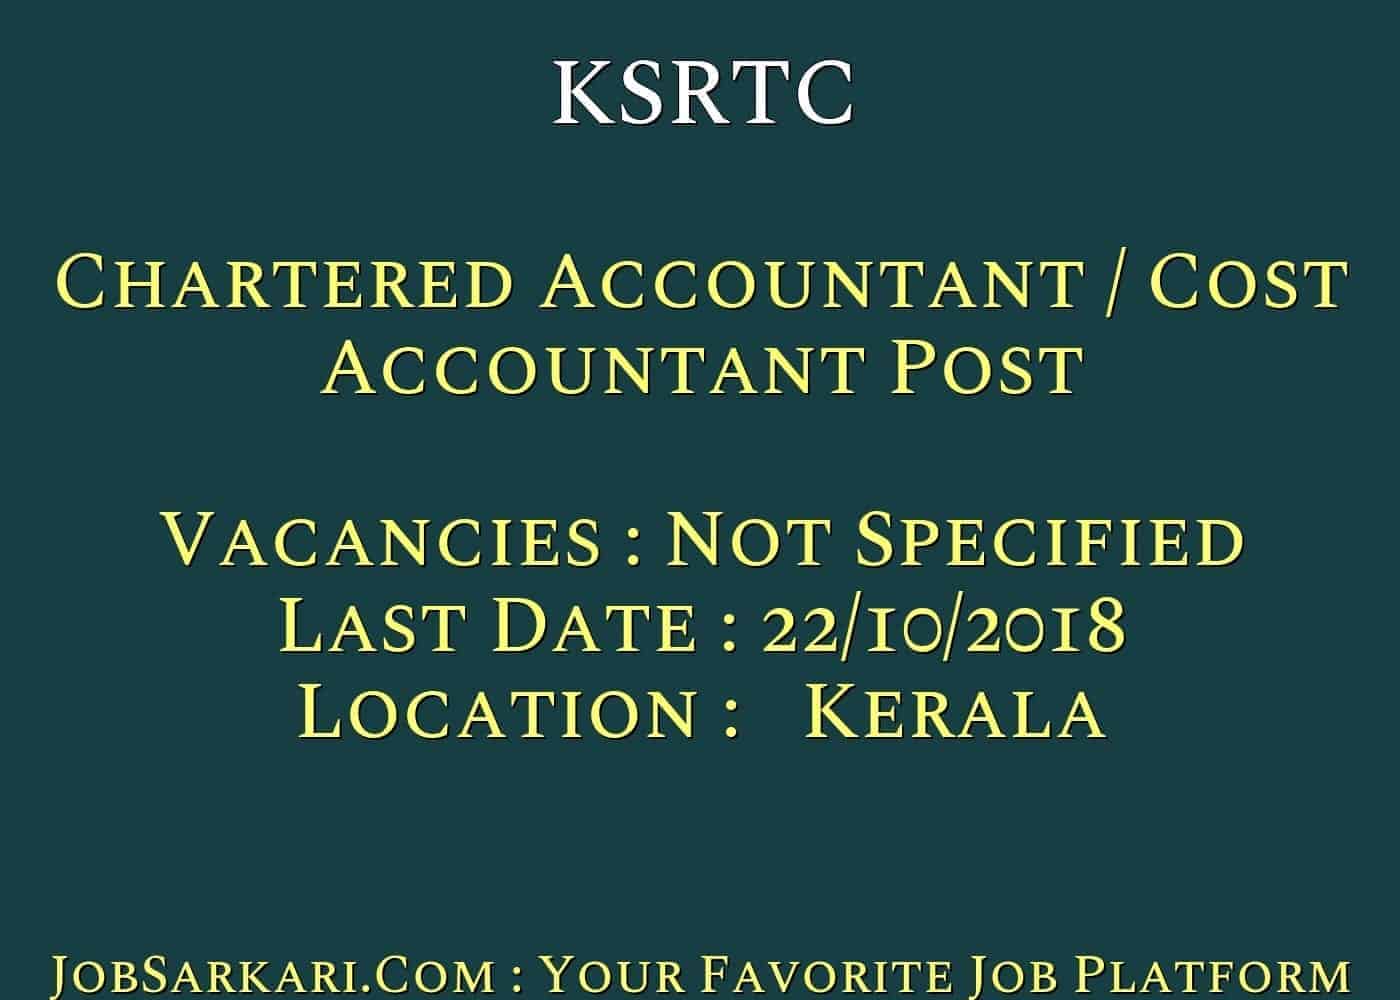 KSRTC Recruitment 2018 for Chartered Accountant / Cost Accountant Post